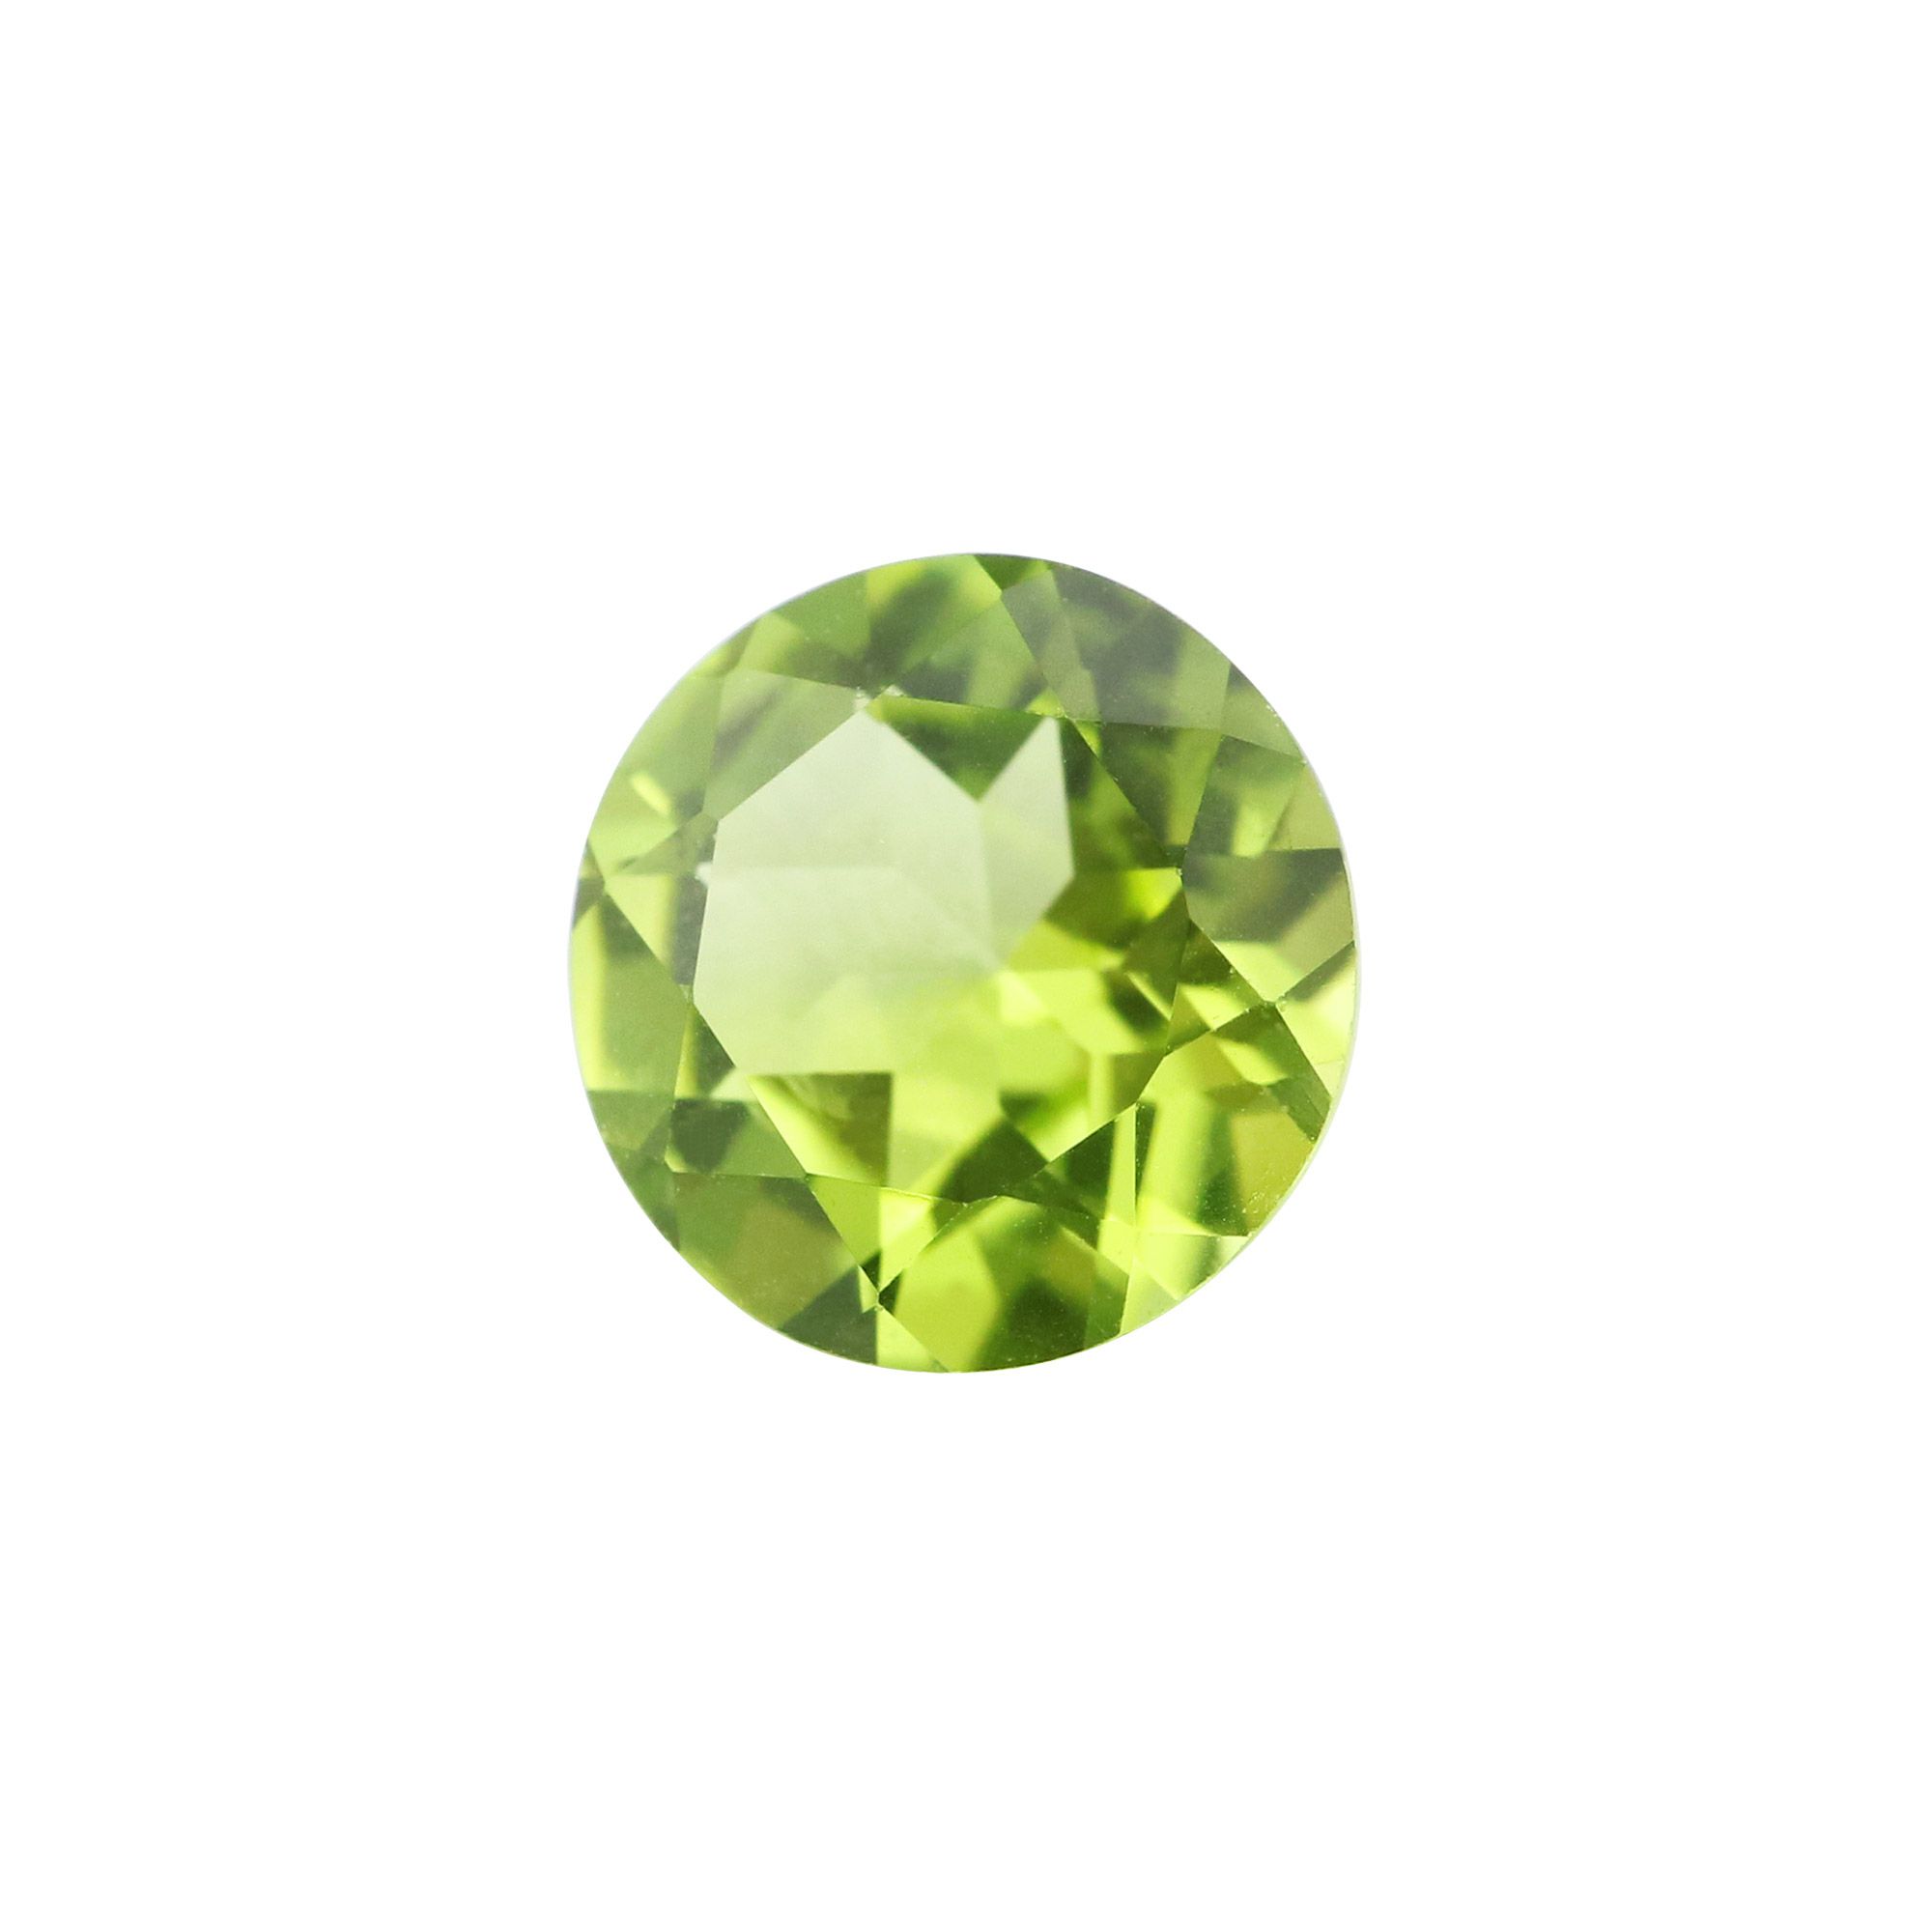 1Pcs 1-8MM Round Green Peridot August Birthstone Faceted Cut Loose Gemstone Natural Semi Precious Stone DIY Jewelry Supplies 4110165 - Click Image to Close